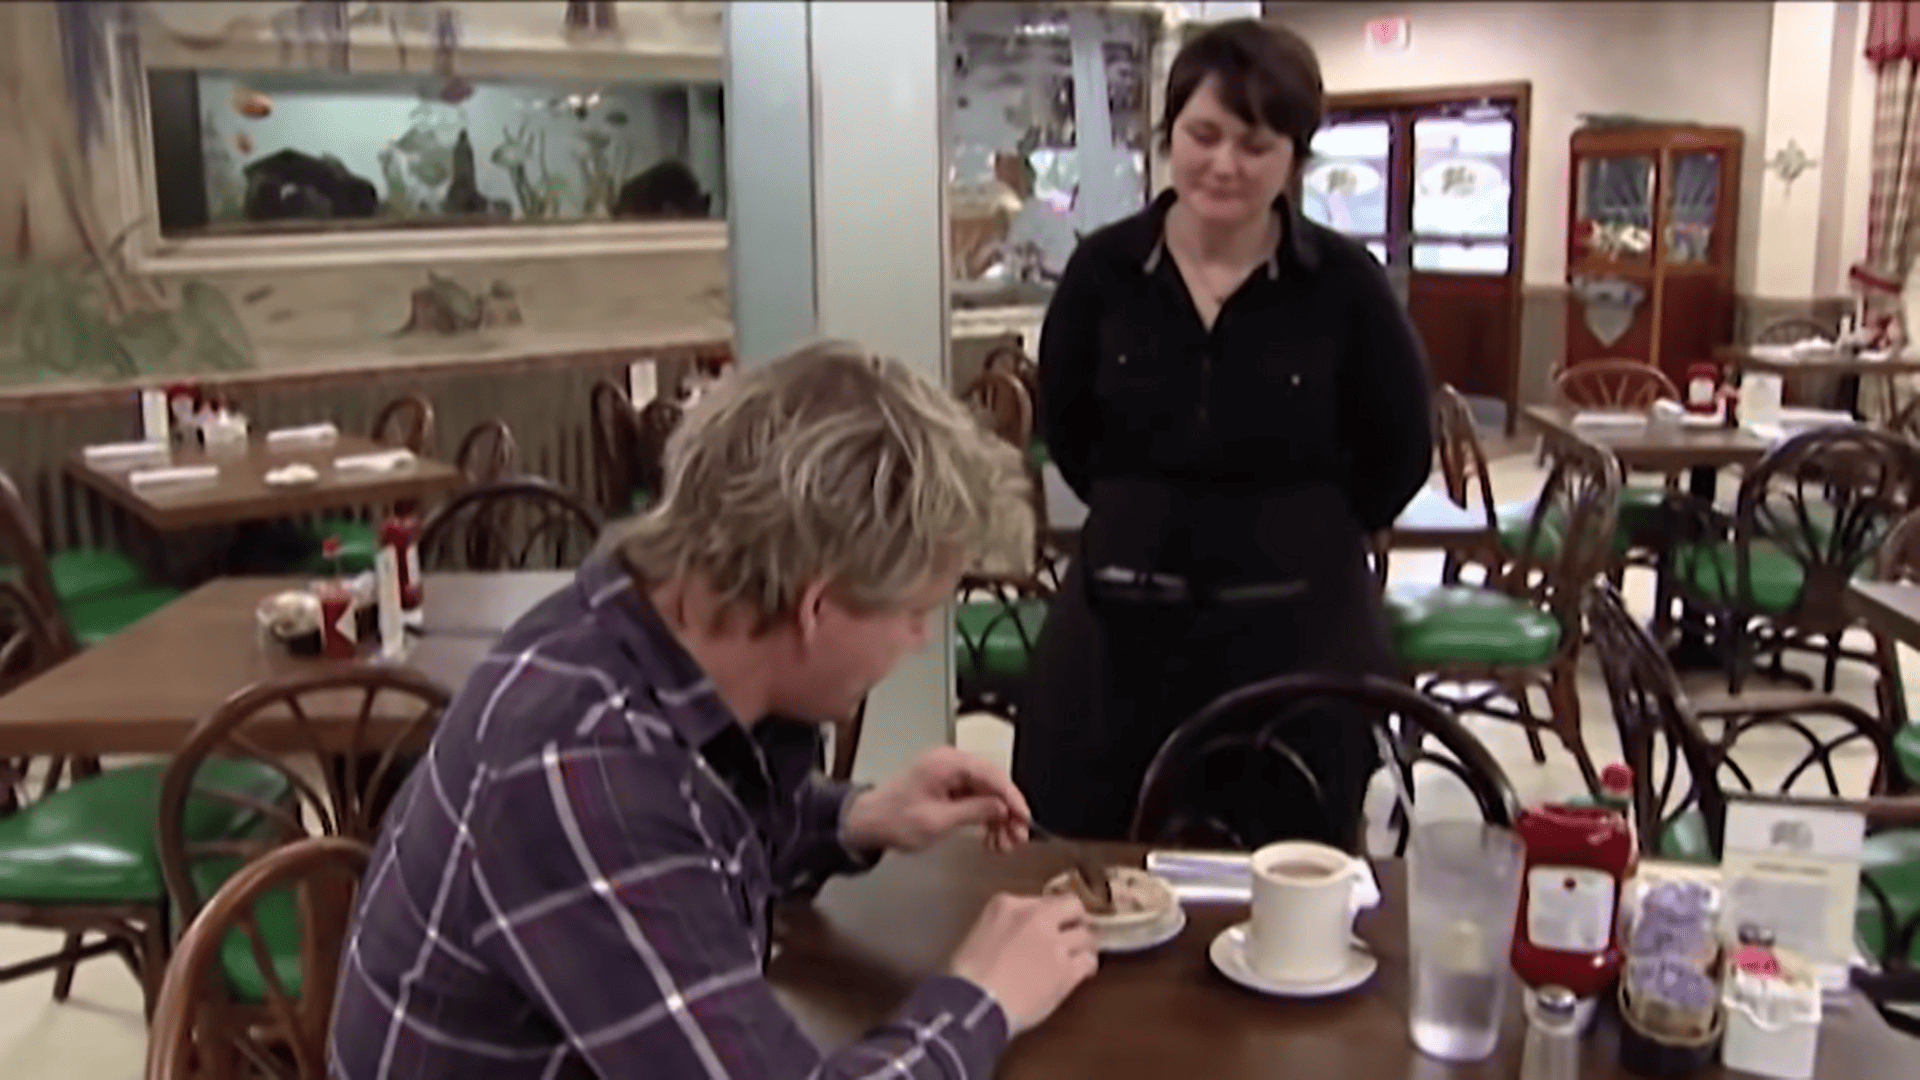 Ramsay trying bread pudding served by waitress Candace in this image from Studio Ramsay Global